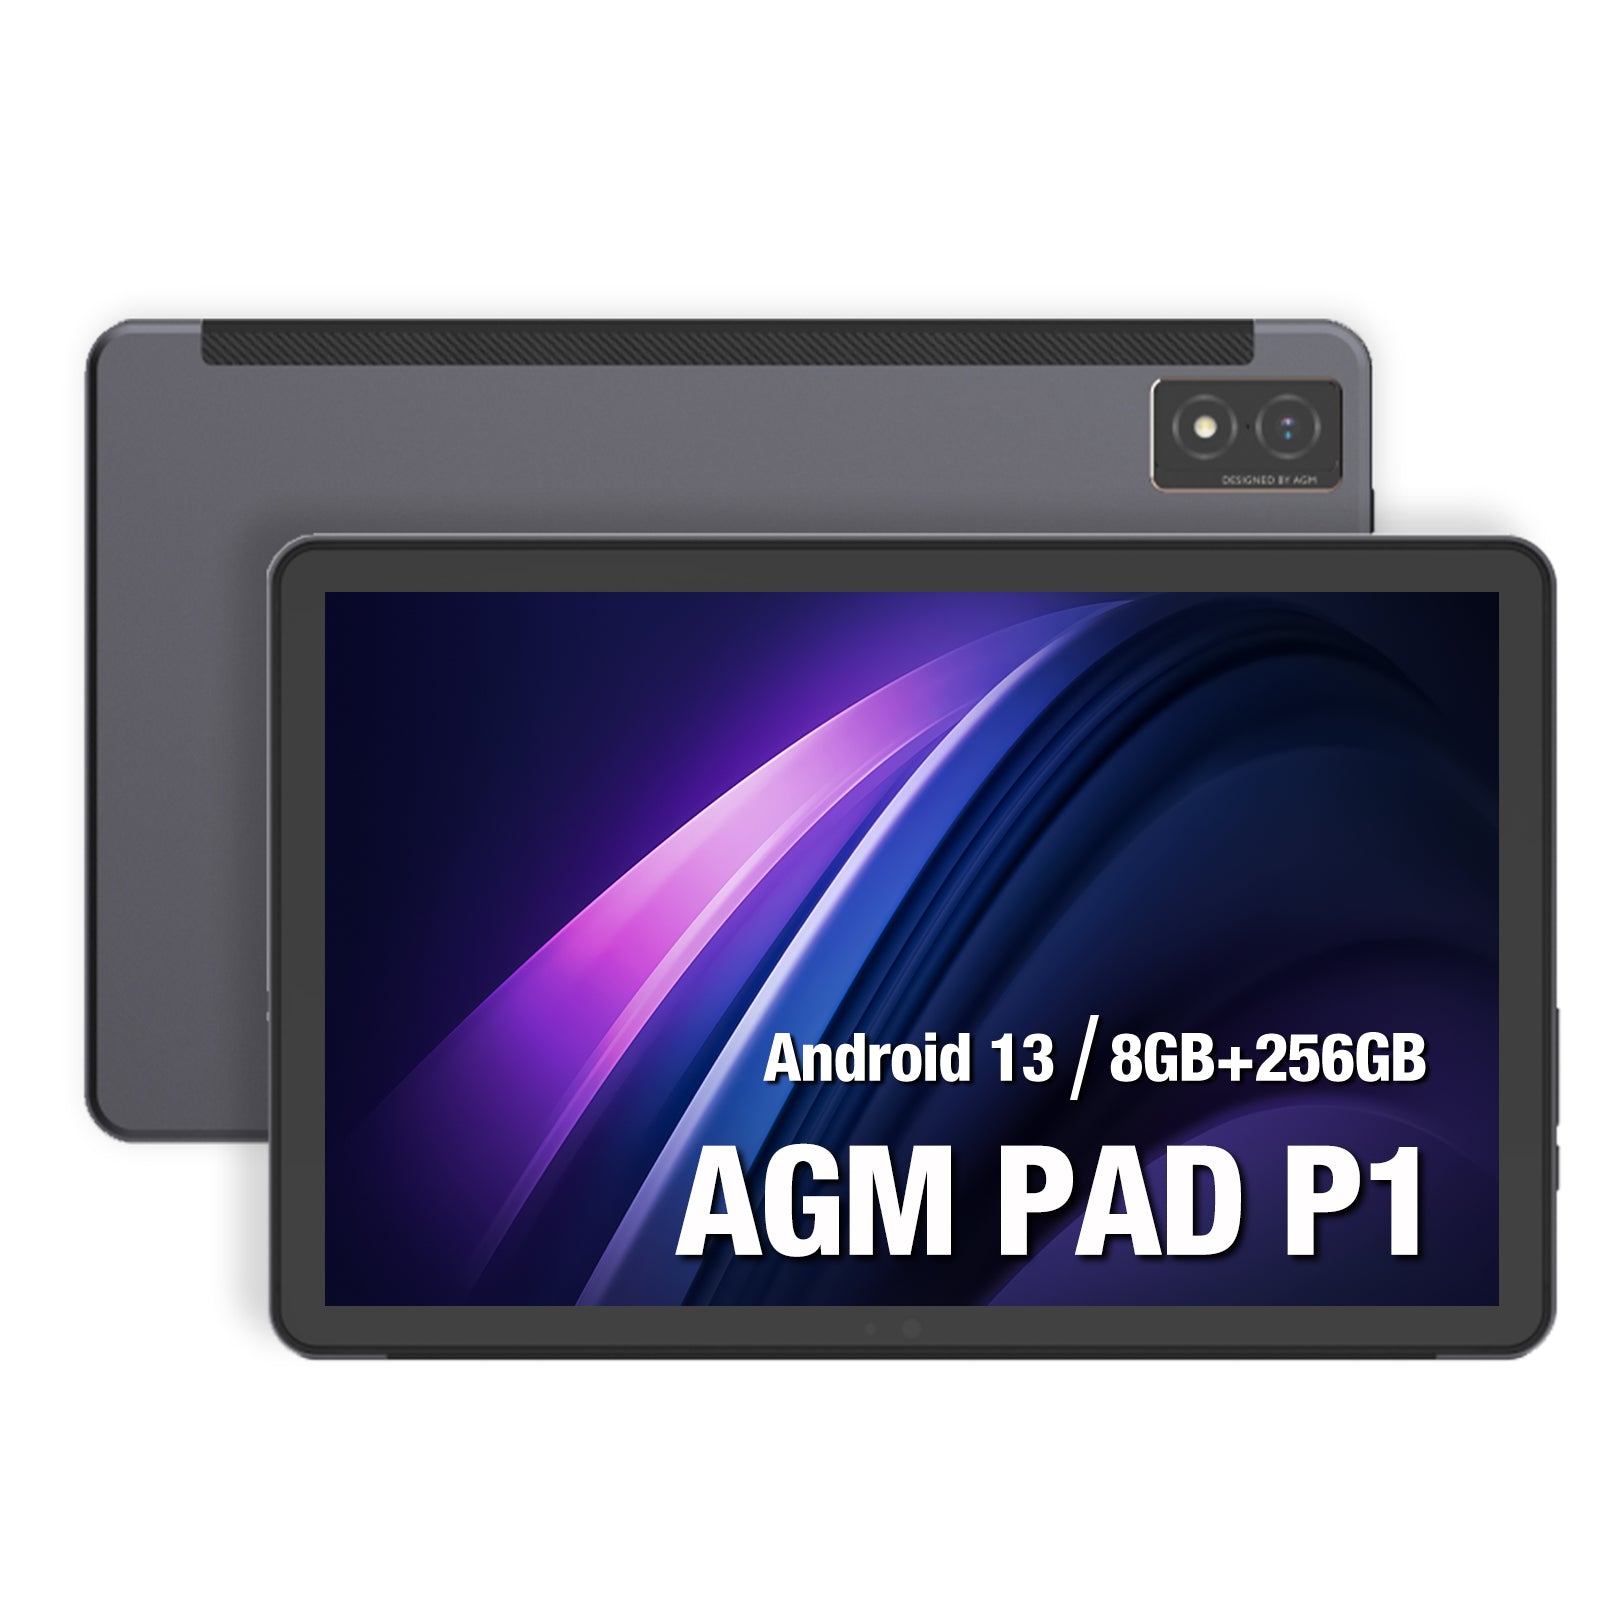 AGM PAD P1 | 4G LTE Waterproof & Drop Proof Tablet | Powerful Chipset | Lightweight | 2K Resolution Display | Big Battery | Android 13